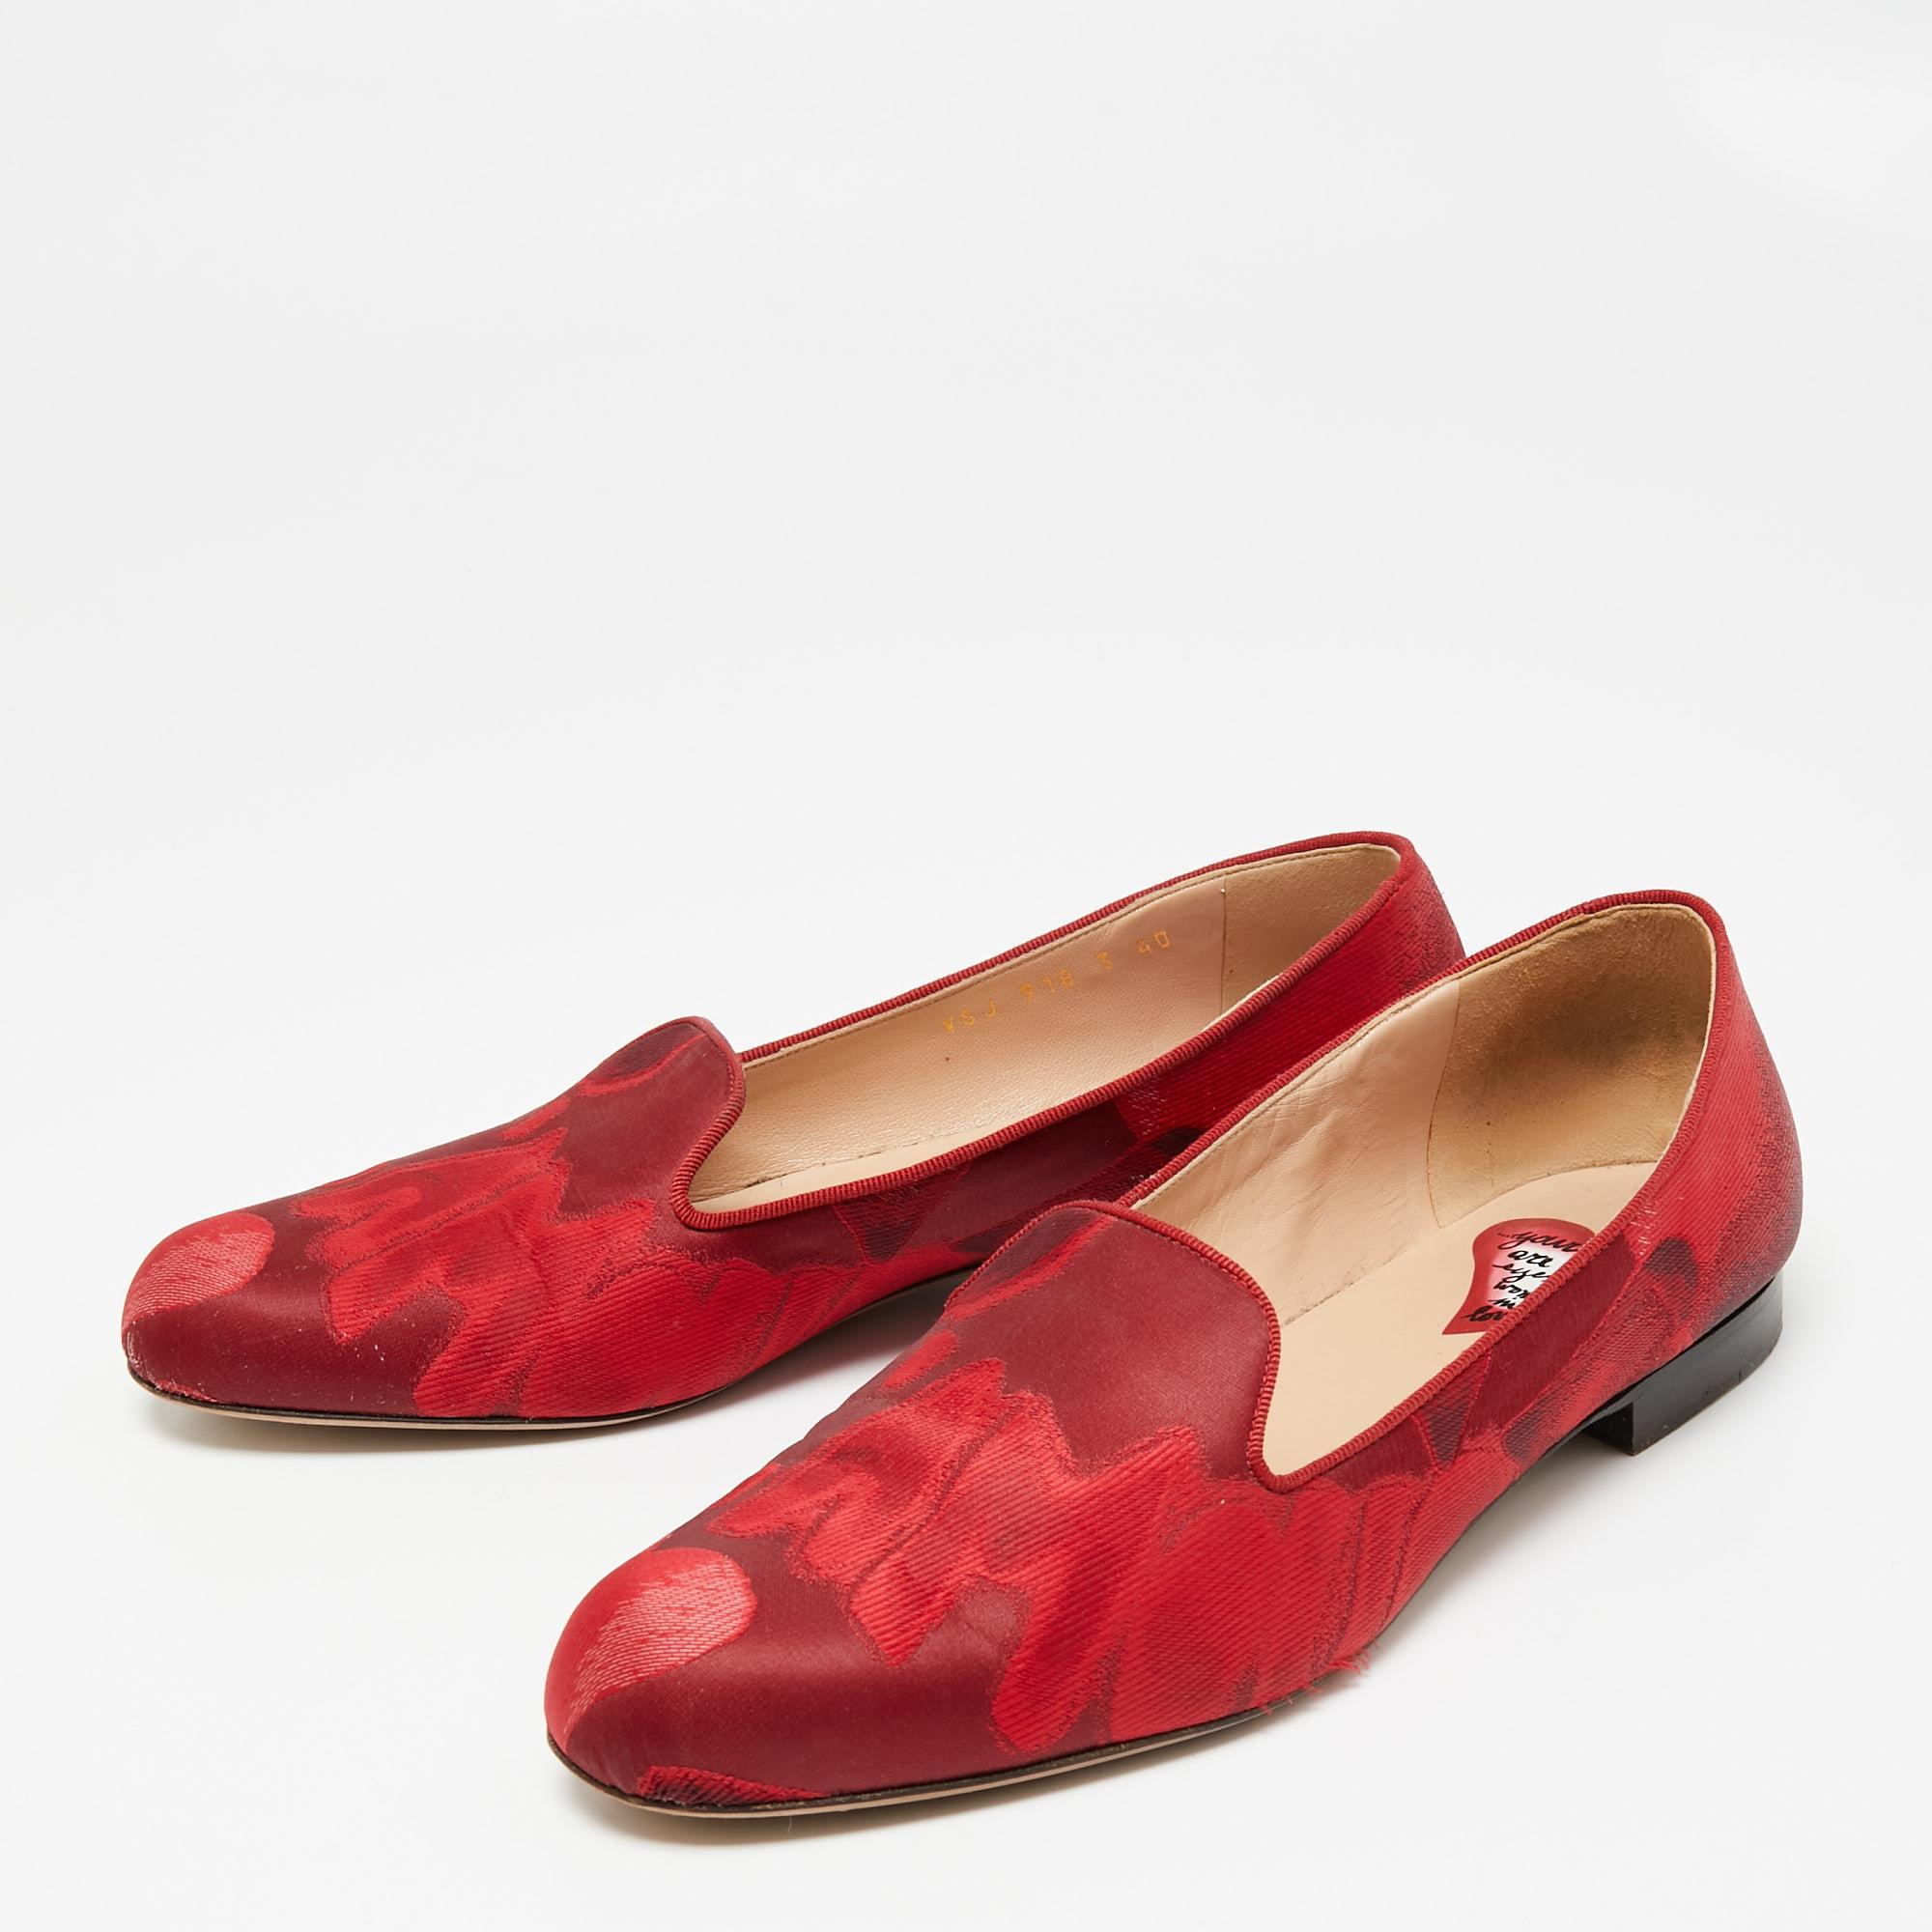 These smoking slippers from the House of Valentino are here to grant your feet the ultimate comfortable experience. They are crafted from red suede and flaunt an easy slip-on style. They are elevated with embroidery detailing. Add these trendy